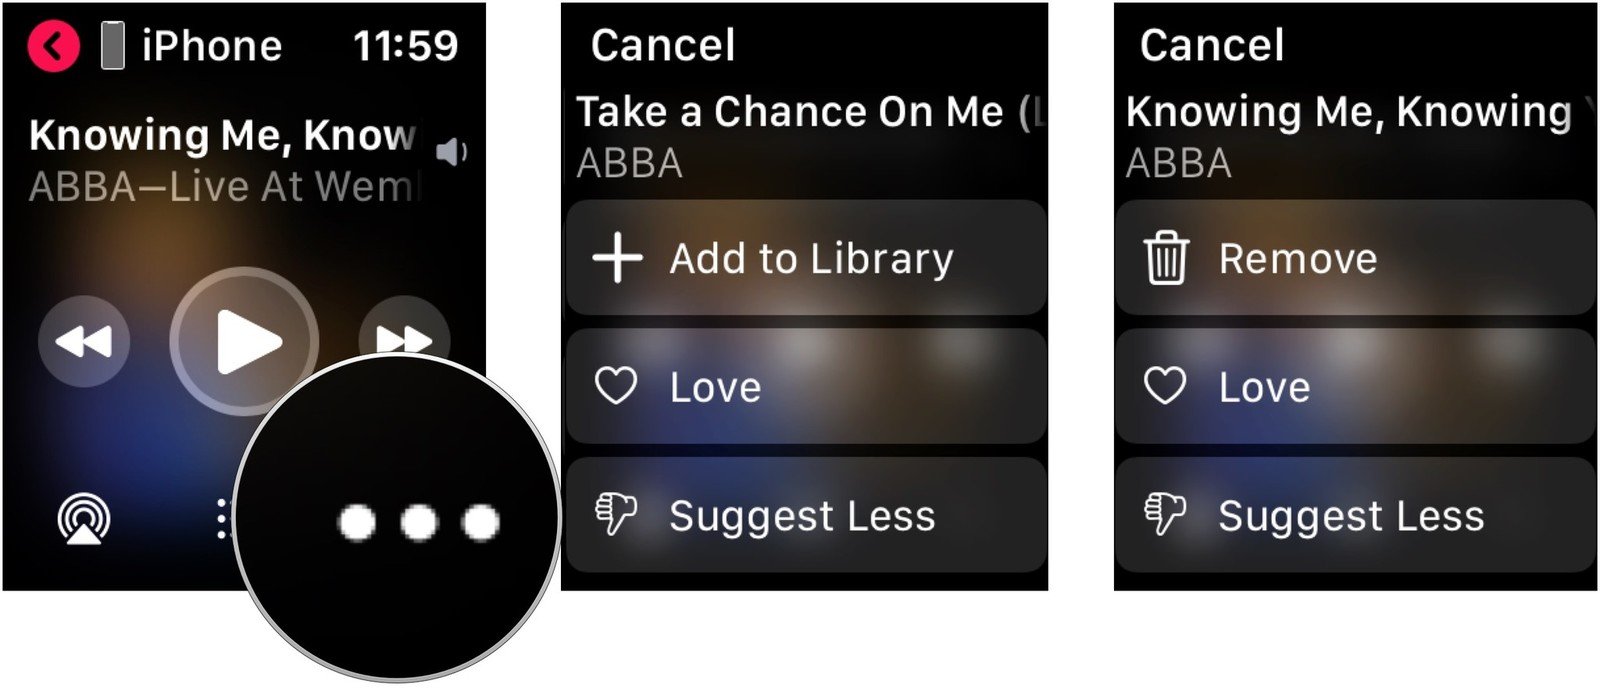 To use the playback controls on Apple Watch, tap the ... icon and make your selection